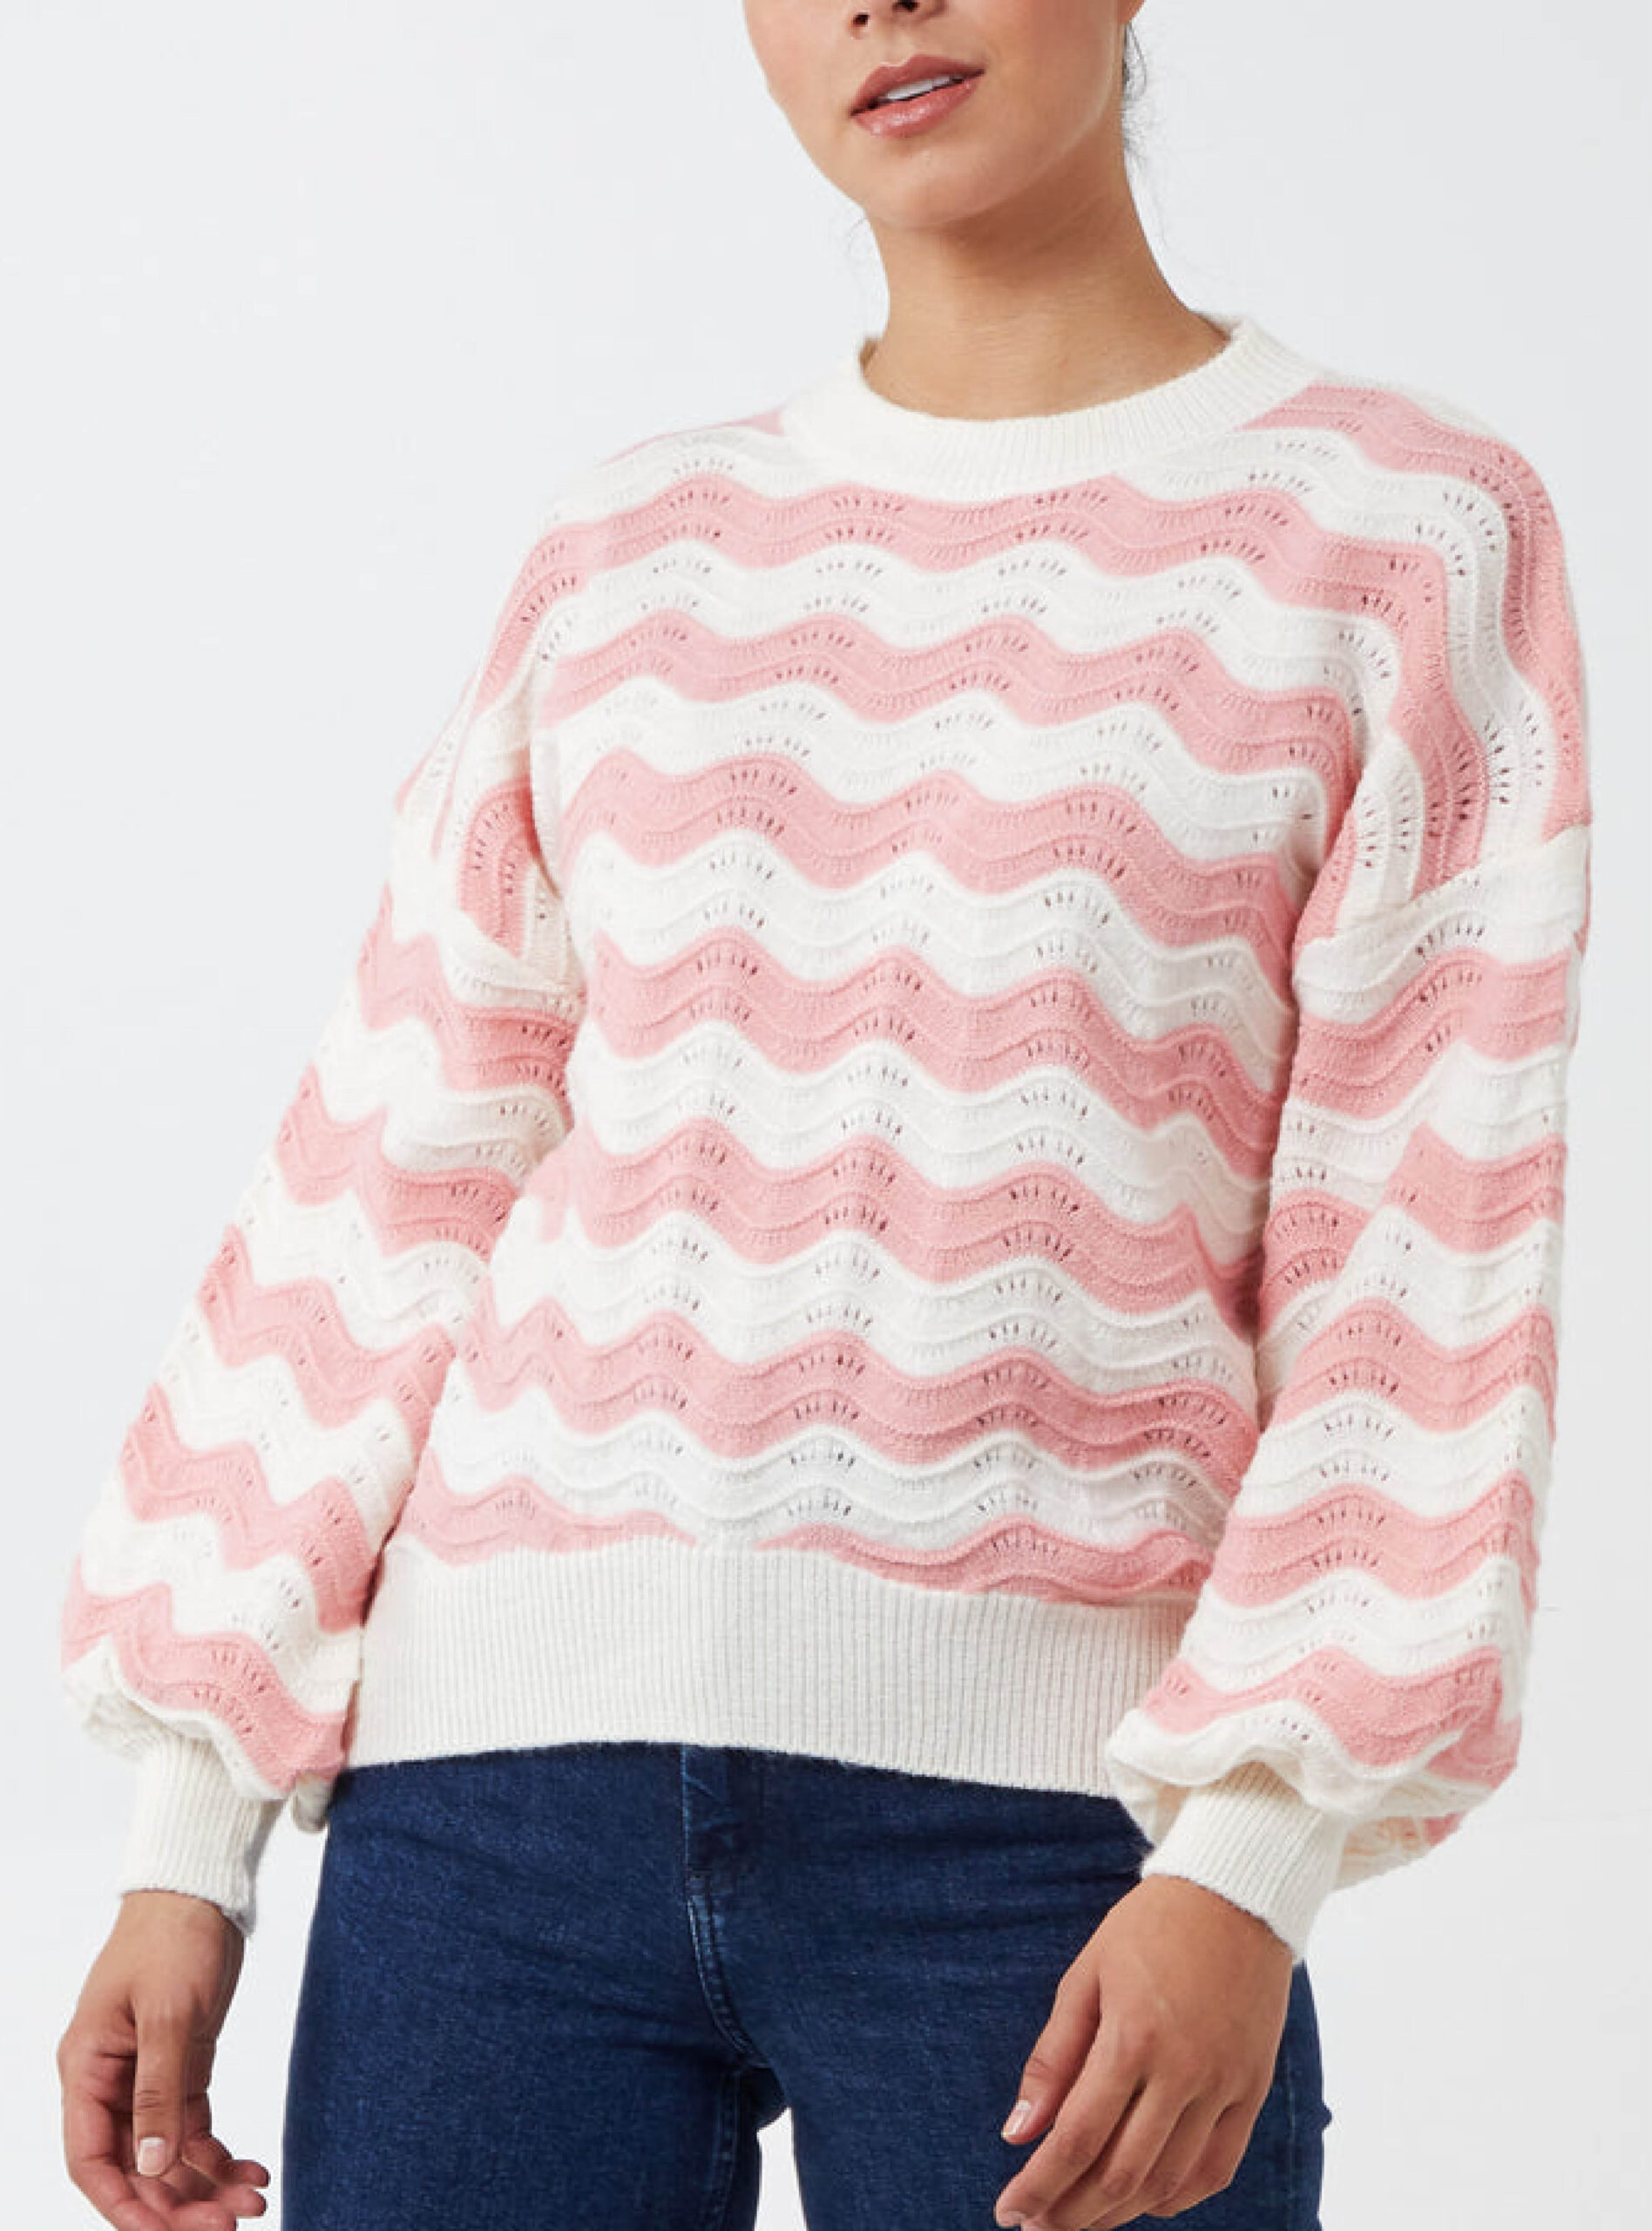 wavy knitted sweater